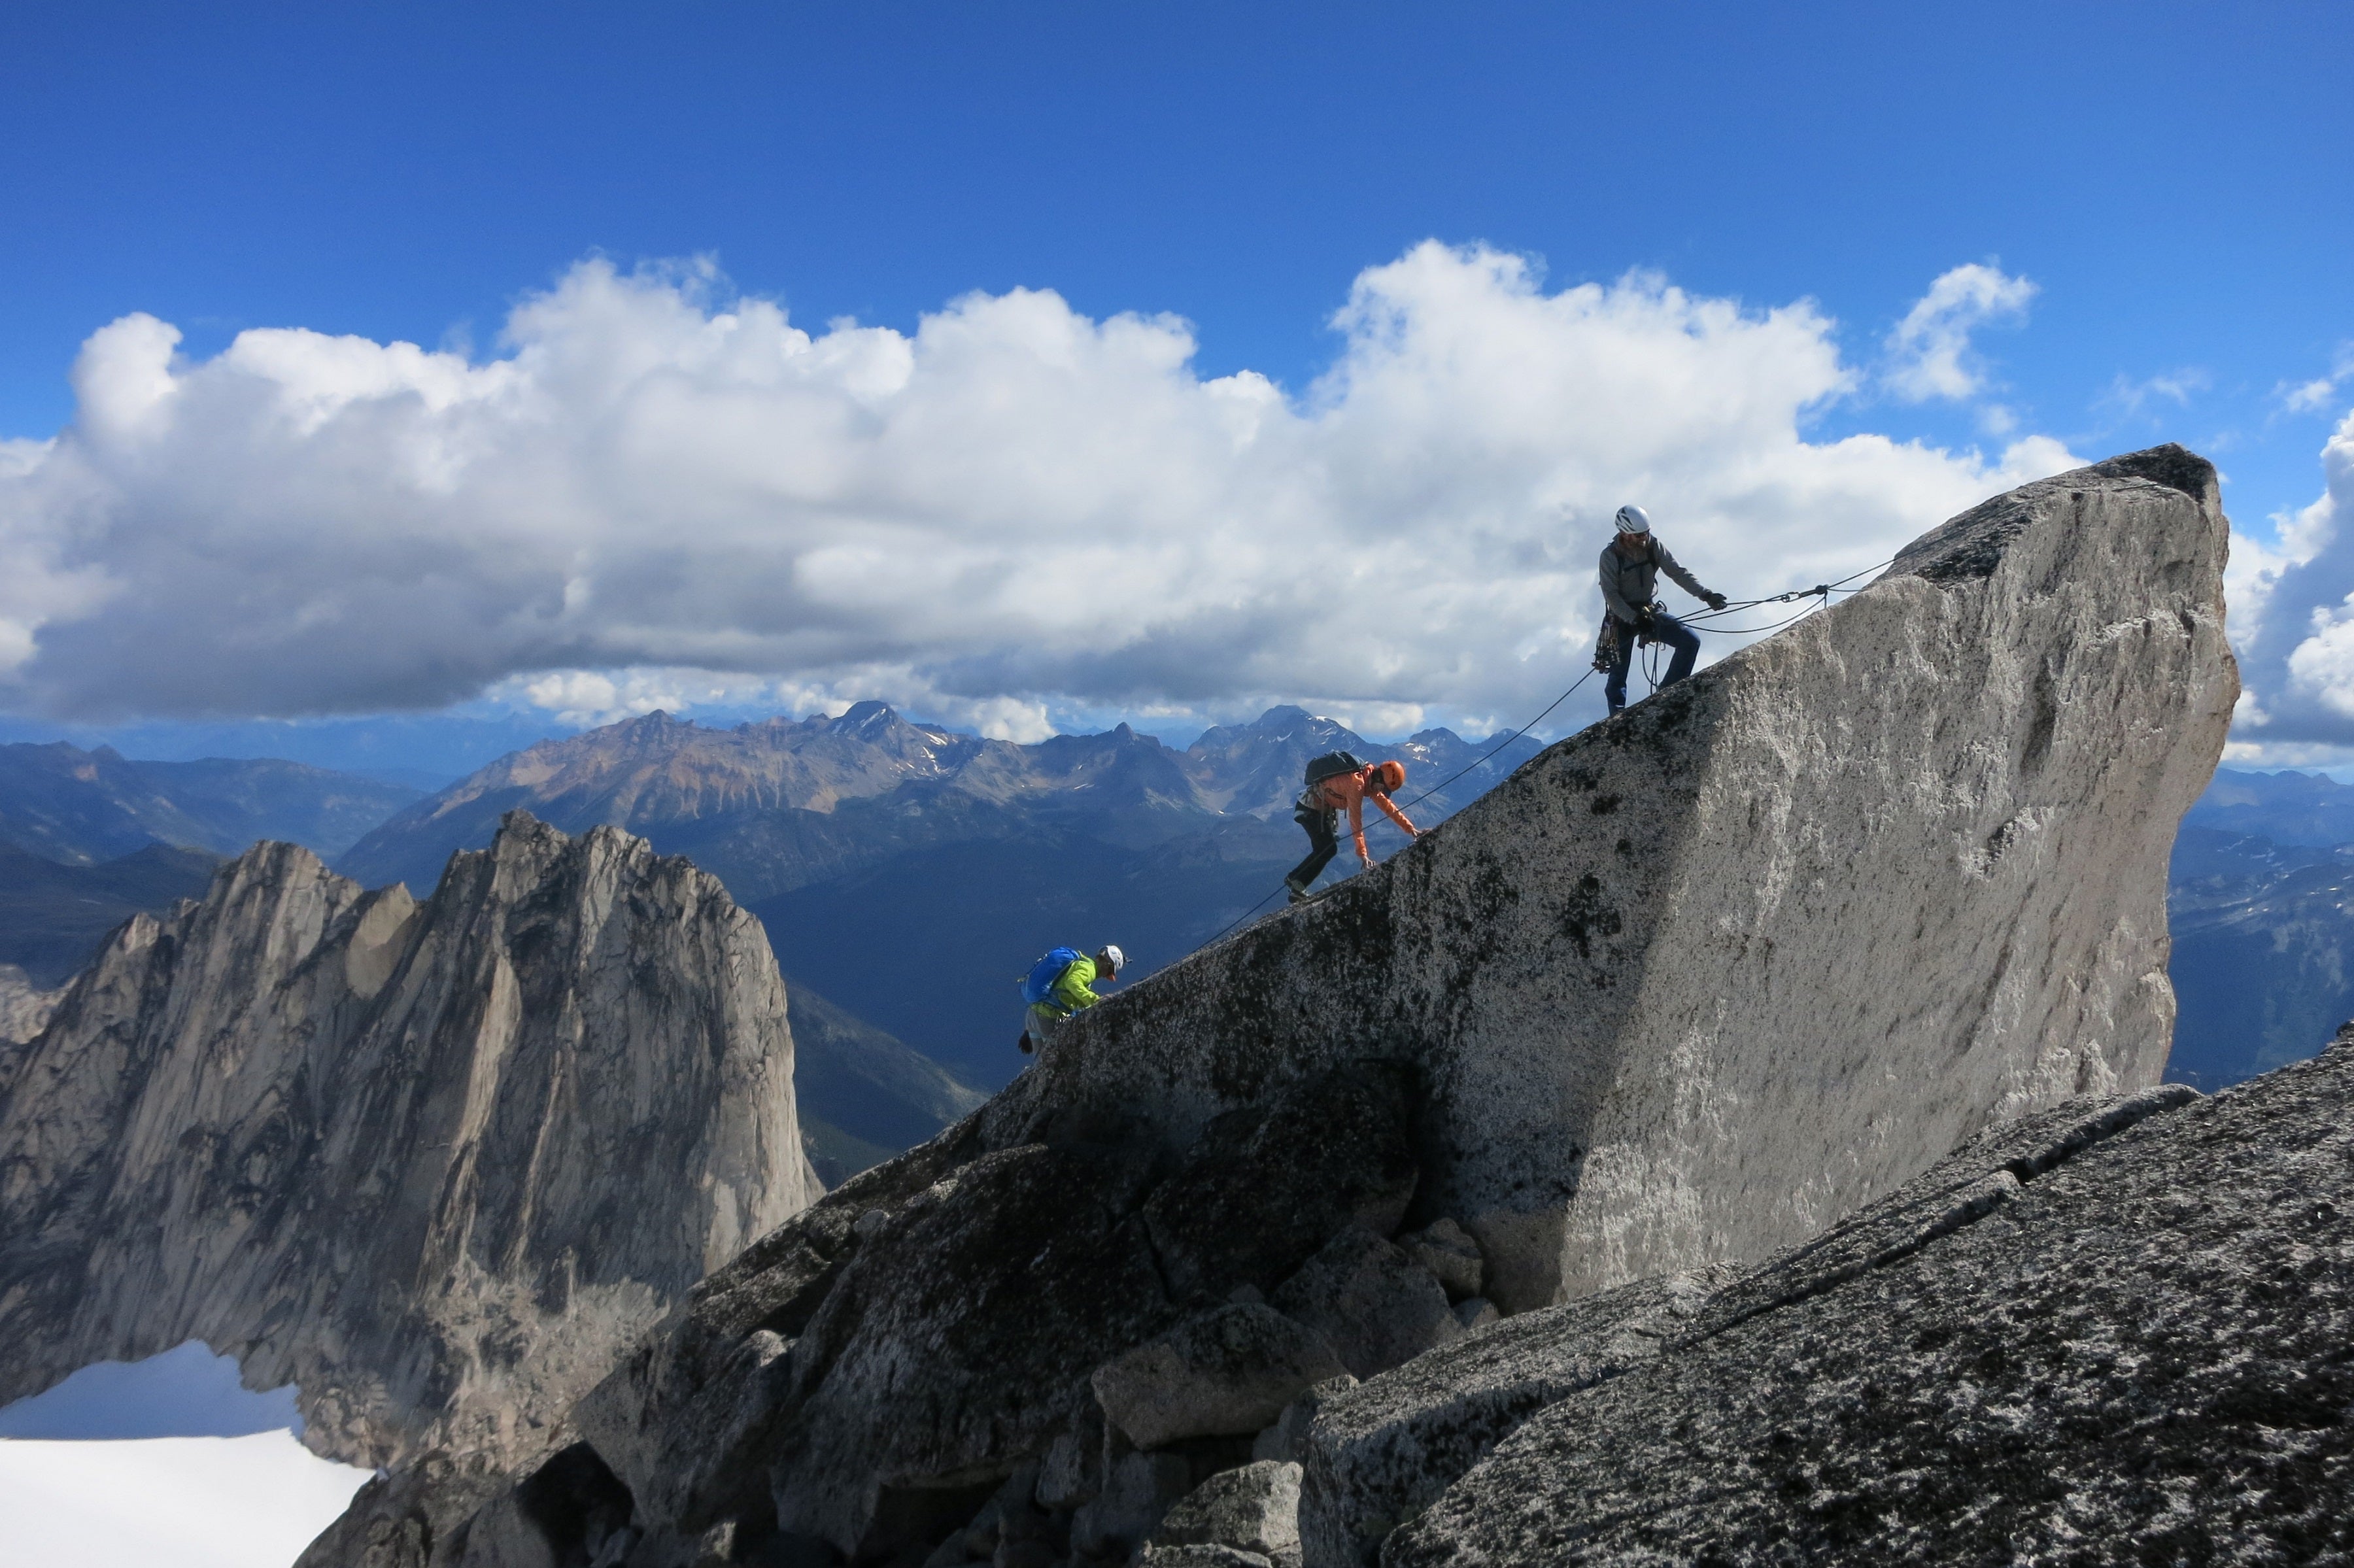 One climber top belays two others near the peak of a mountain. Mountains are visible in the background.